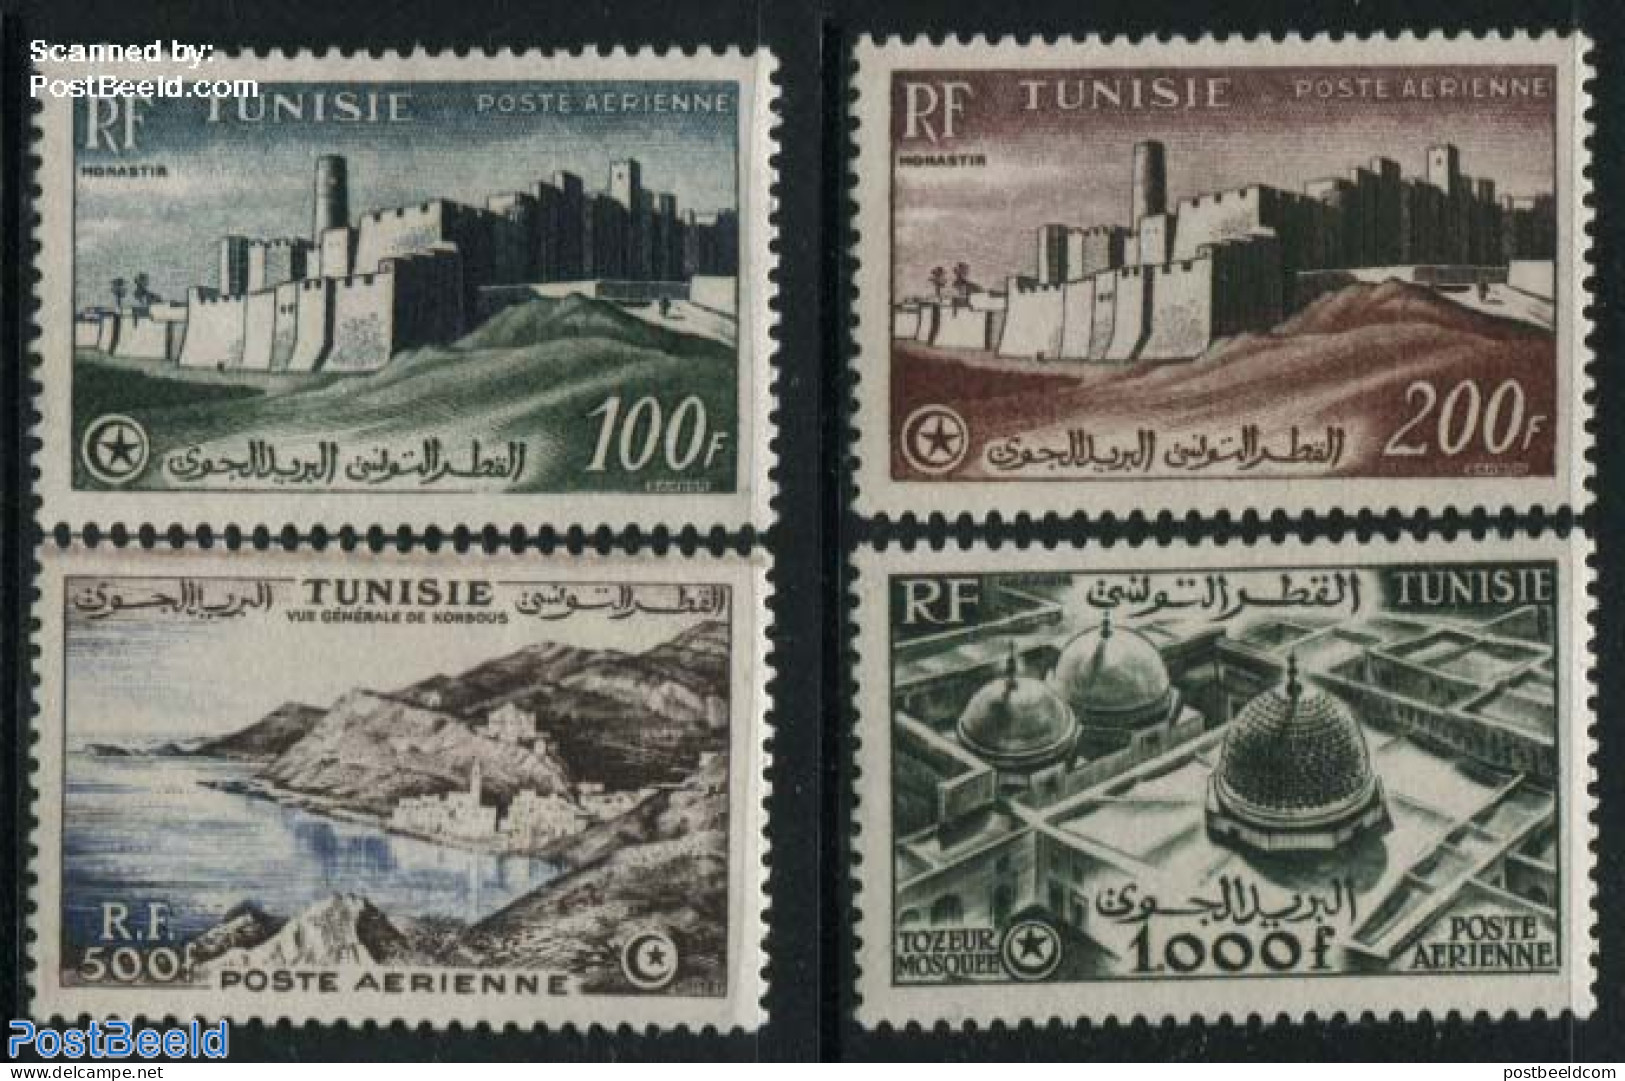 Tunisia 1953 Definitives 4v (with RF), Unused (hinged), Art - Castles & Fortifications - Châteaux